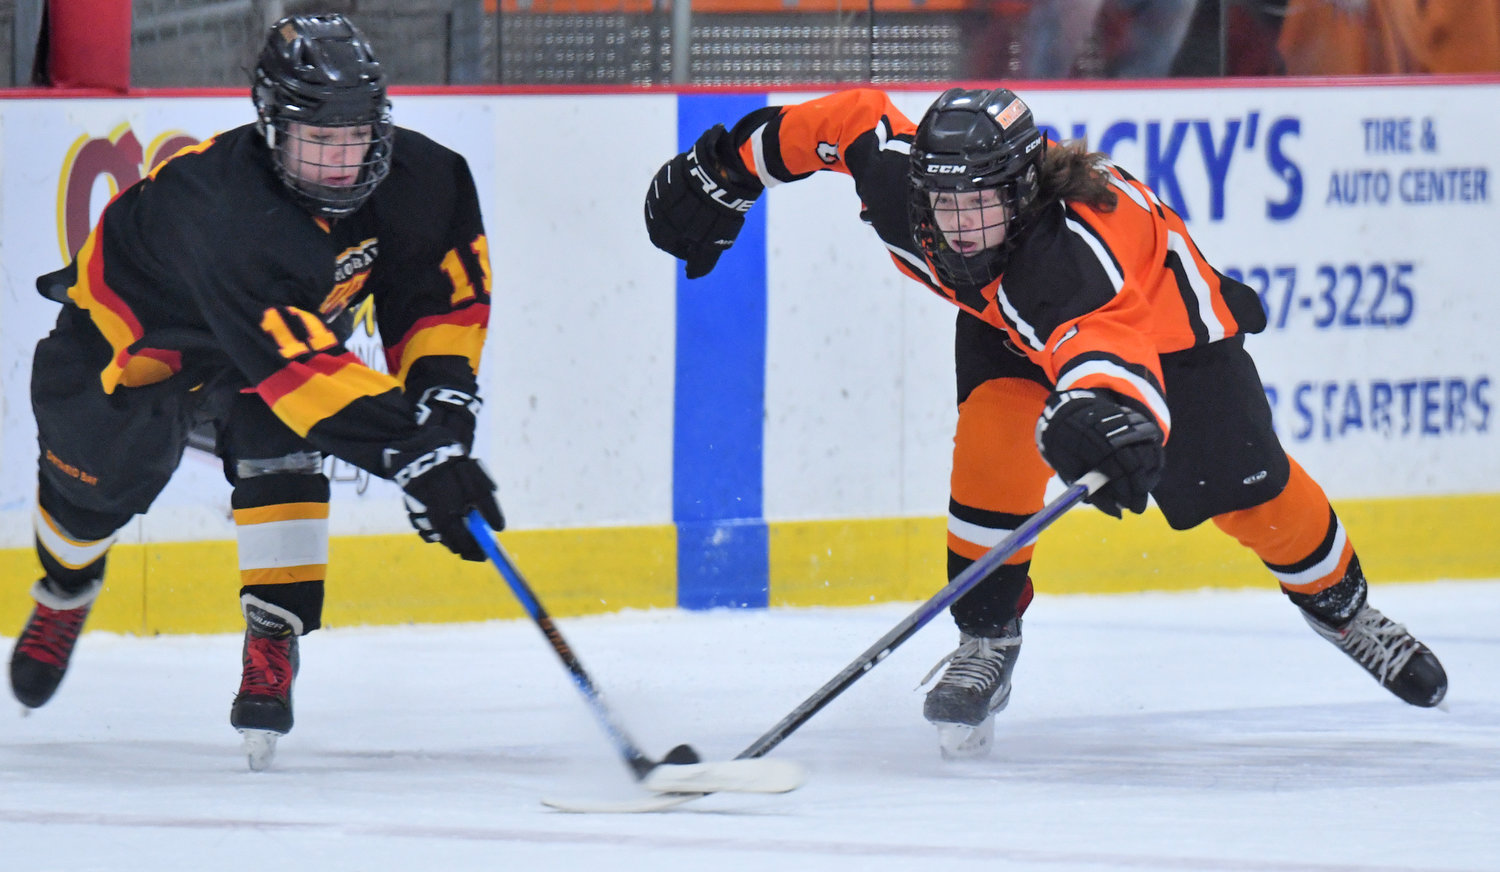 Ontario Bay's Codie Mashaw, left, and Rome Free Academy's Johnny Wilson race for the puck in the first period Tuesday night at Kennedy Arena. Wilson had two primary assists but it wasn't enough, as RFA lost 5-4 in overtime.